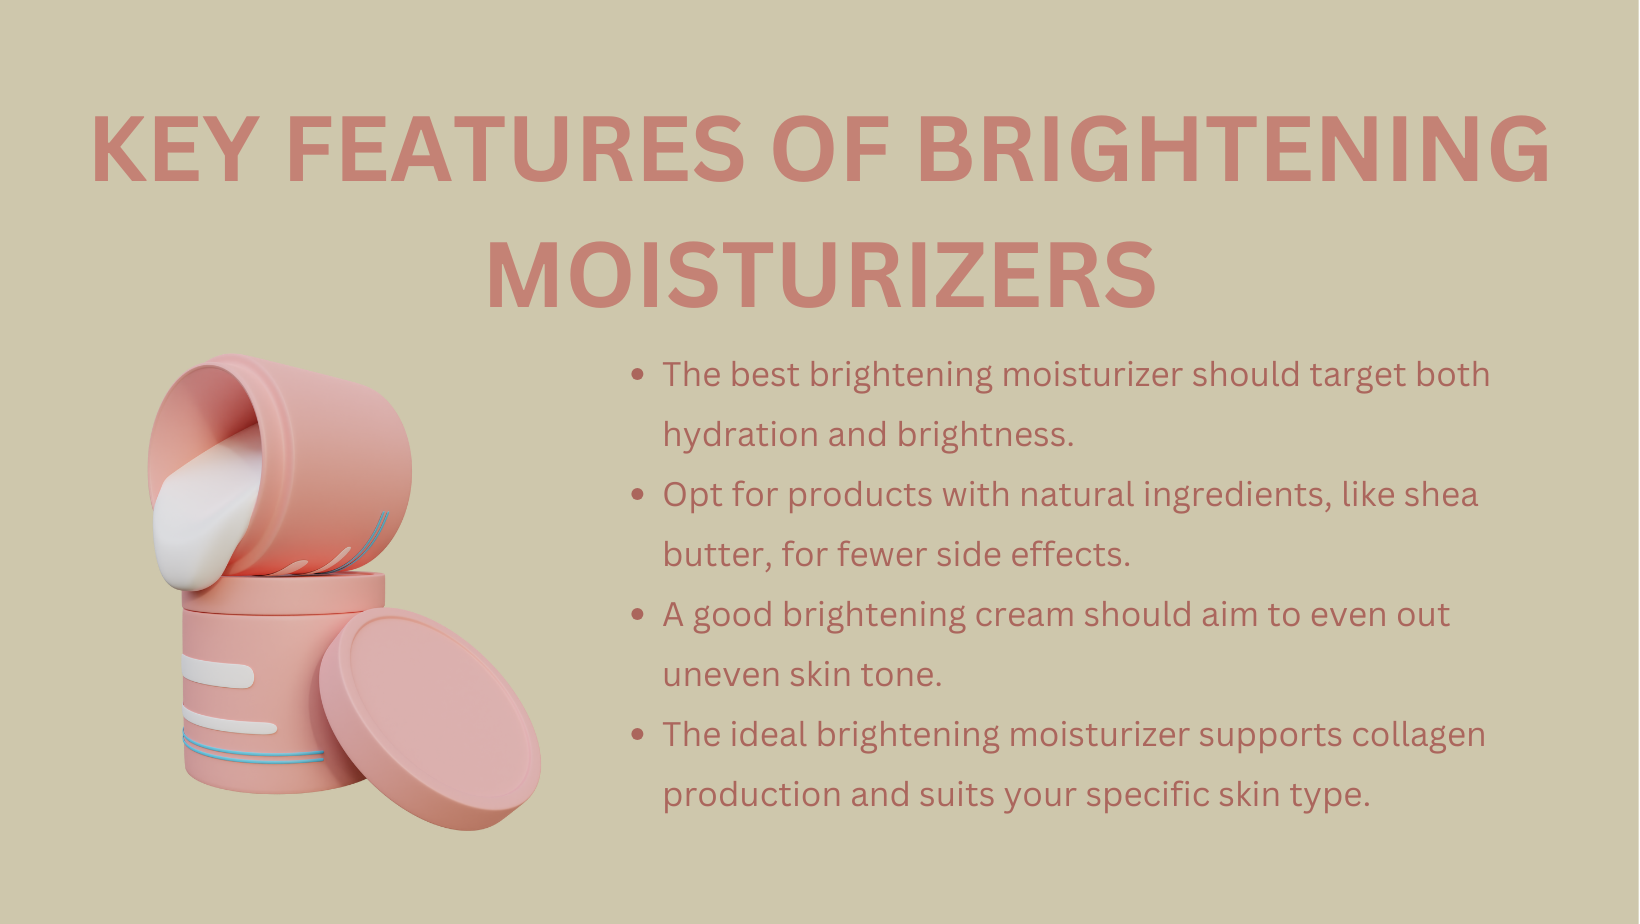 Top 10 Brightening Moisturizers for Glowing Skin